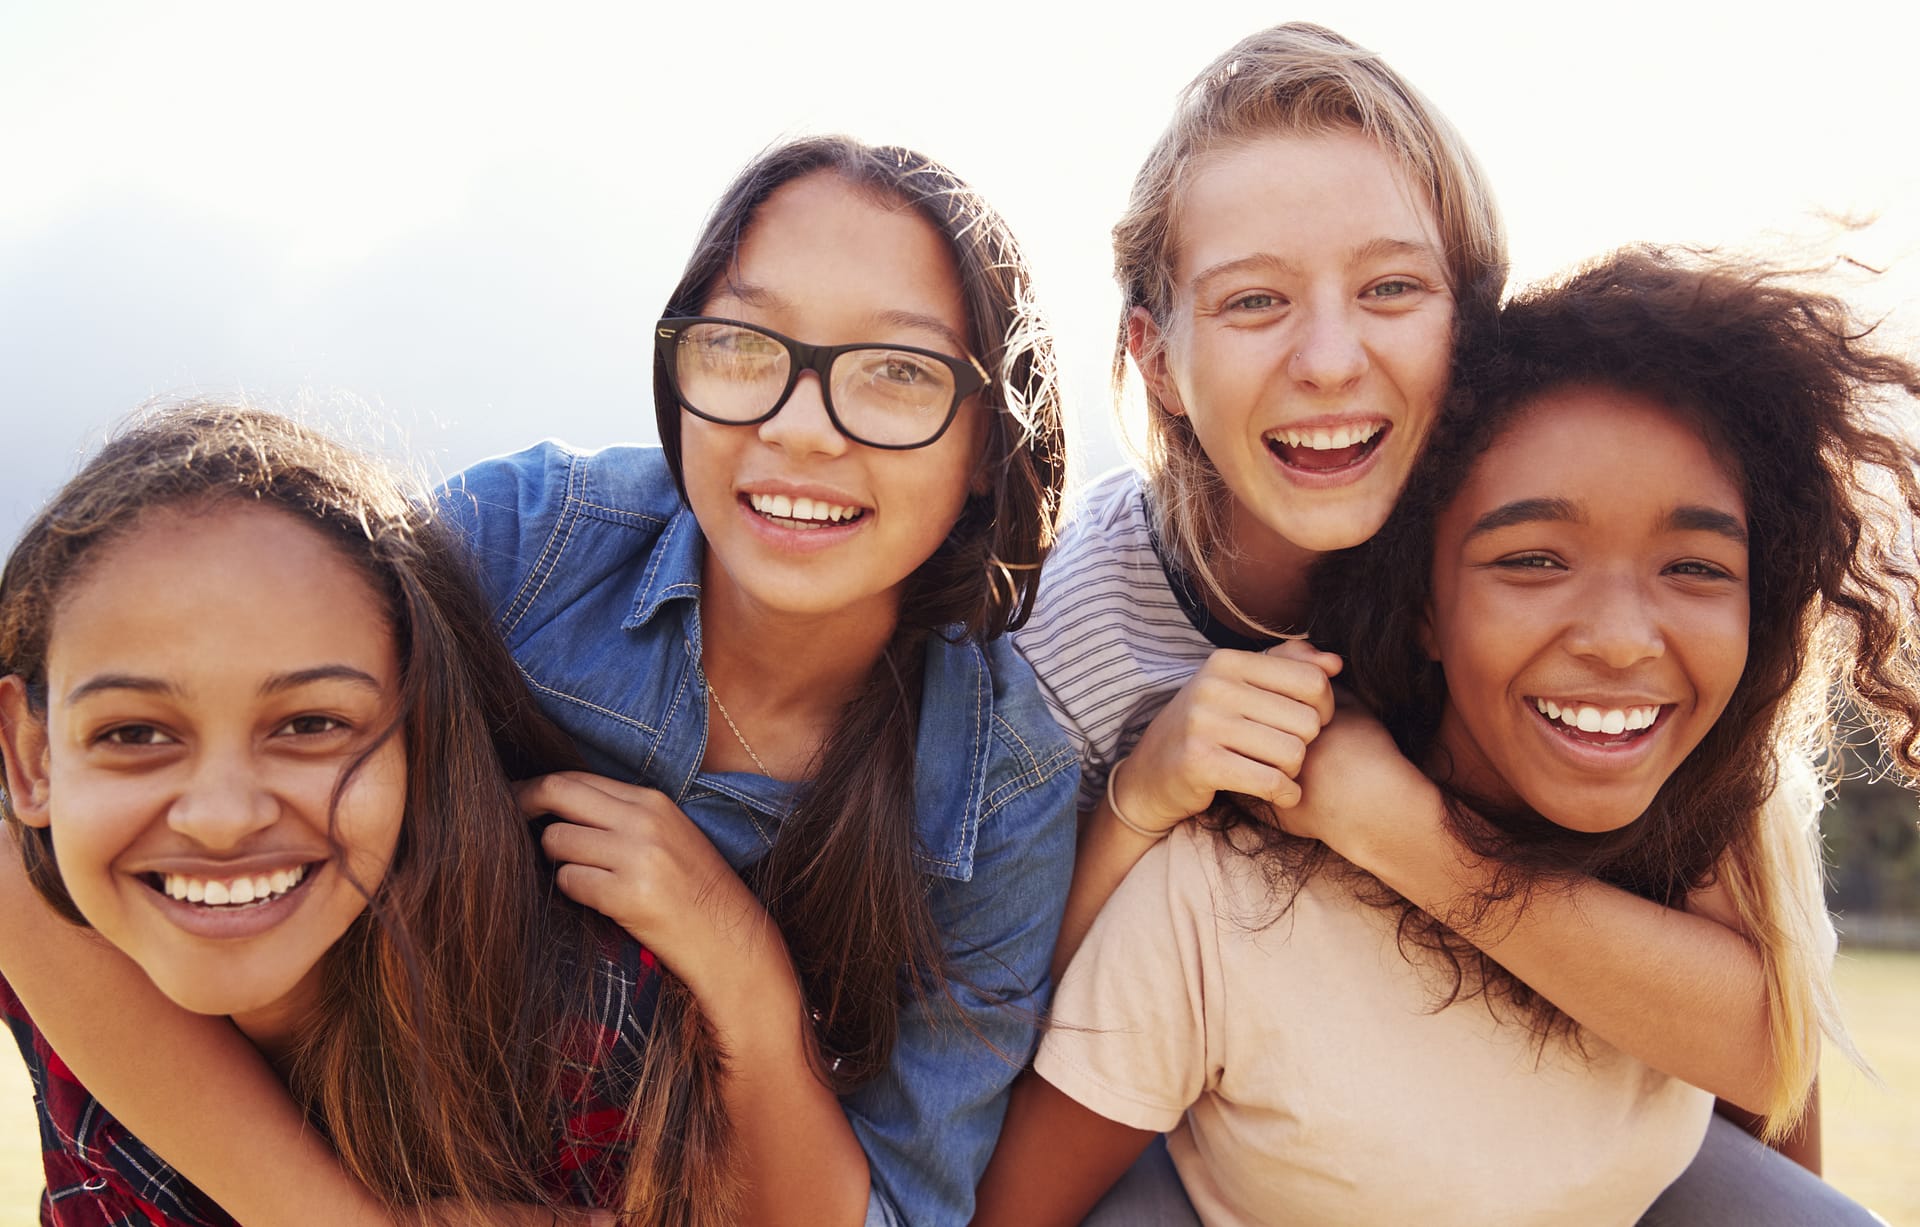 Women’s Counseling Center of Massachusetts provides professional counseling services for adolescents (ages 14-17). 